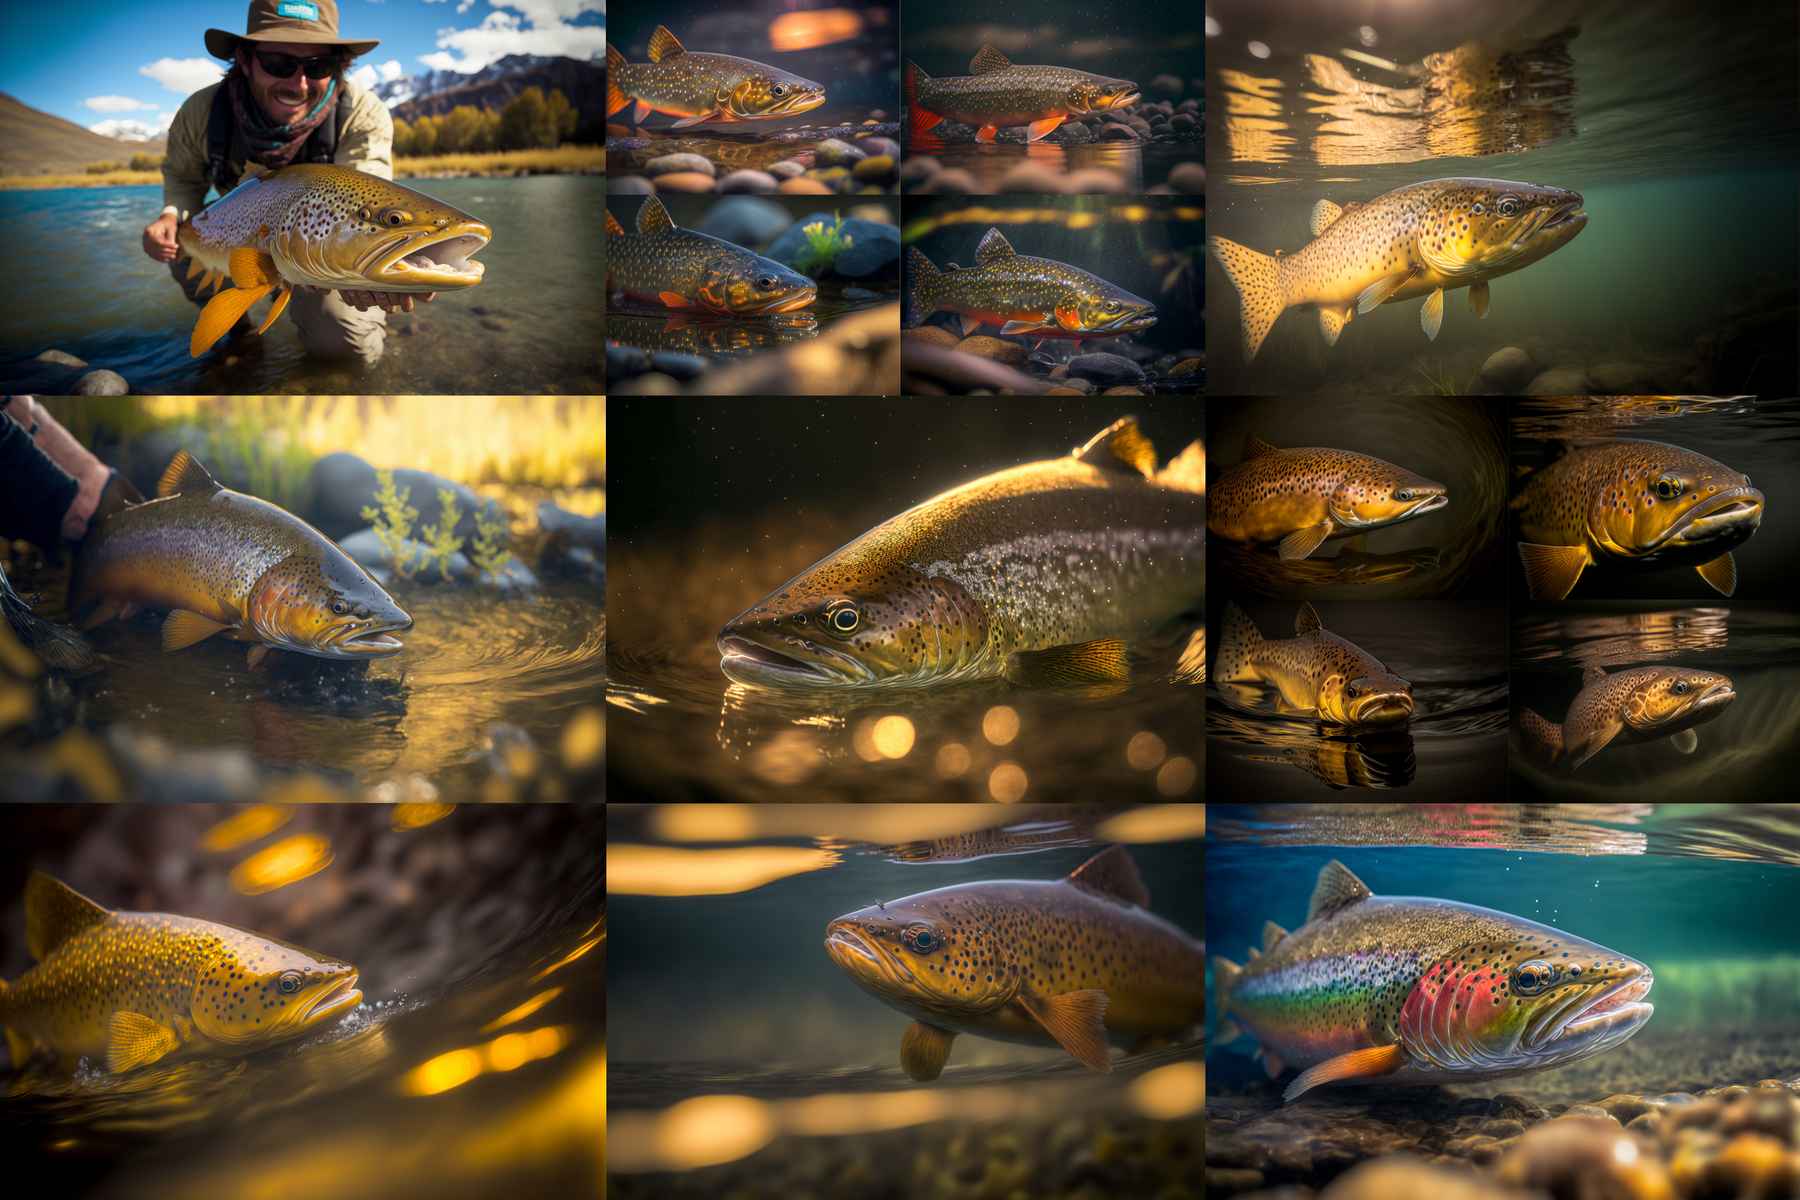 Your social feed will soon be filled with non-existent fish that